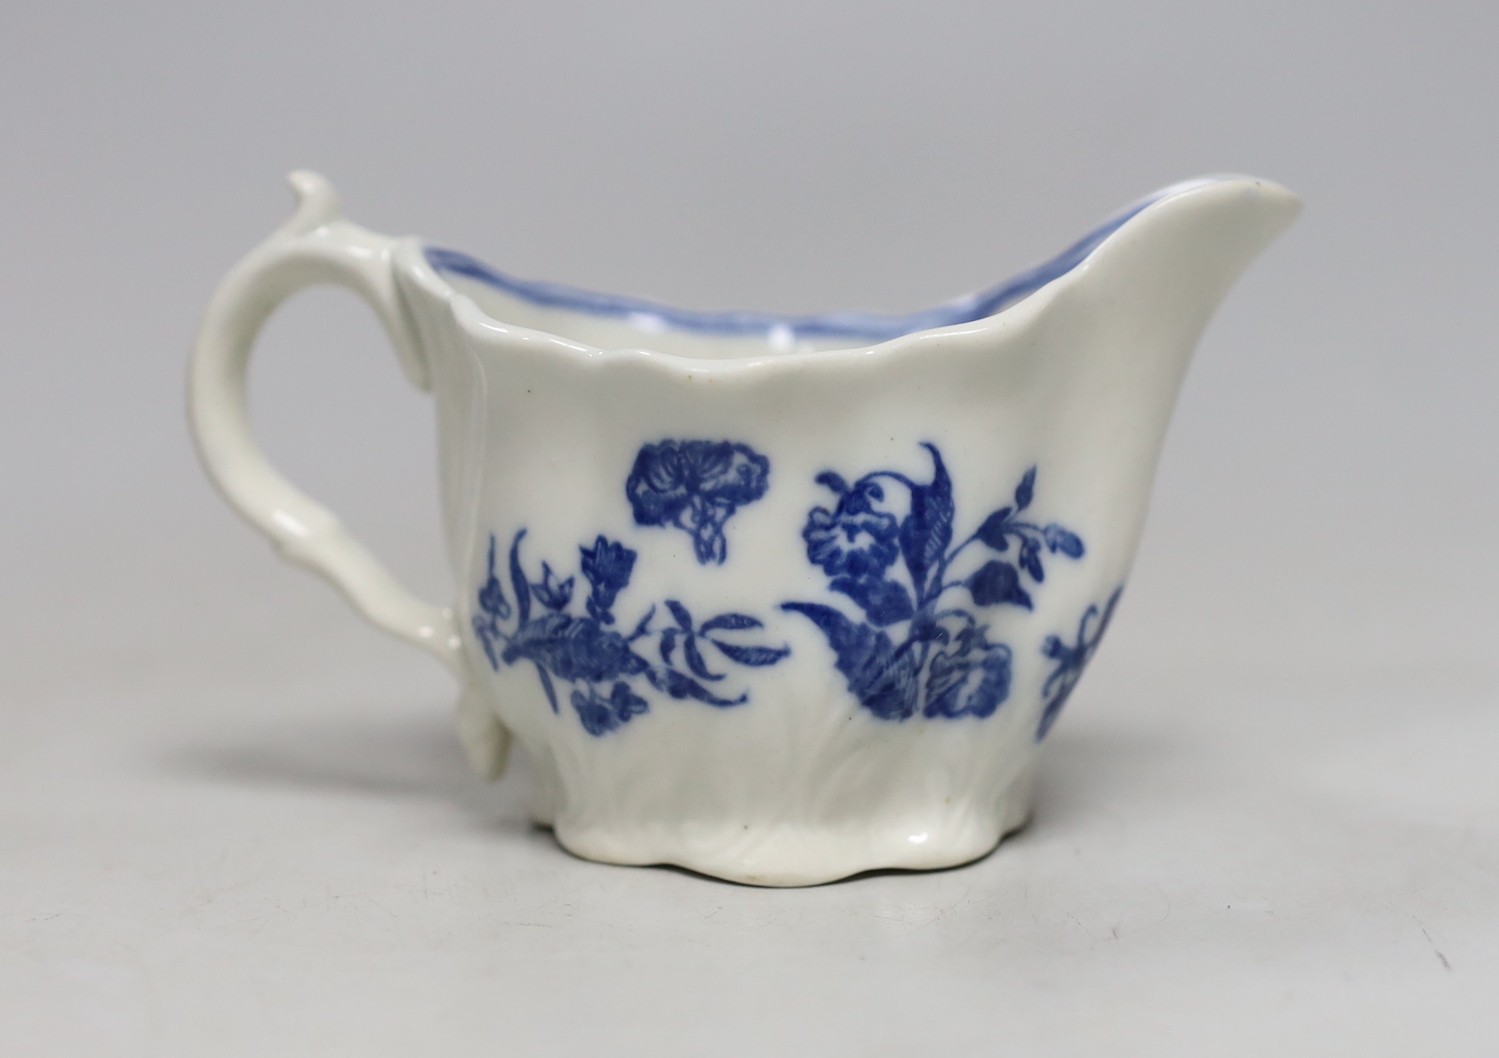 An 18th century Caughley Low Chelsea ewer printed with flowers, 6.5 cms high                                                                                                                                                